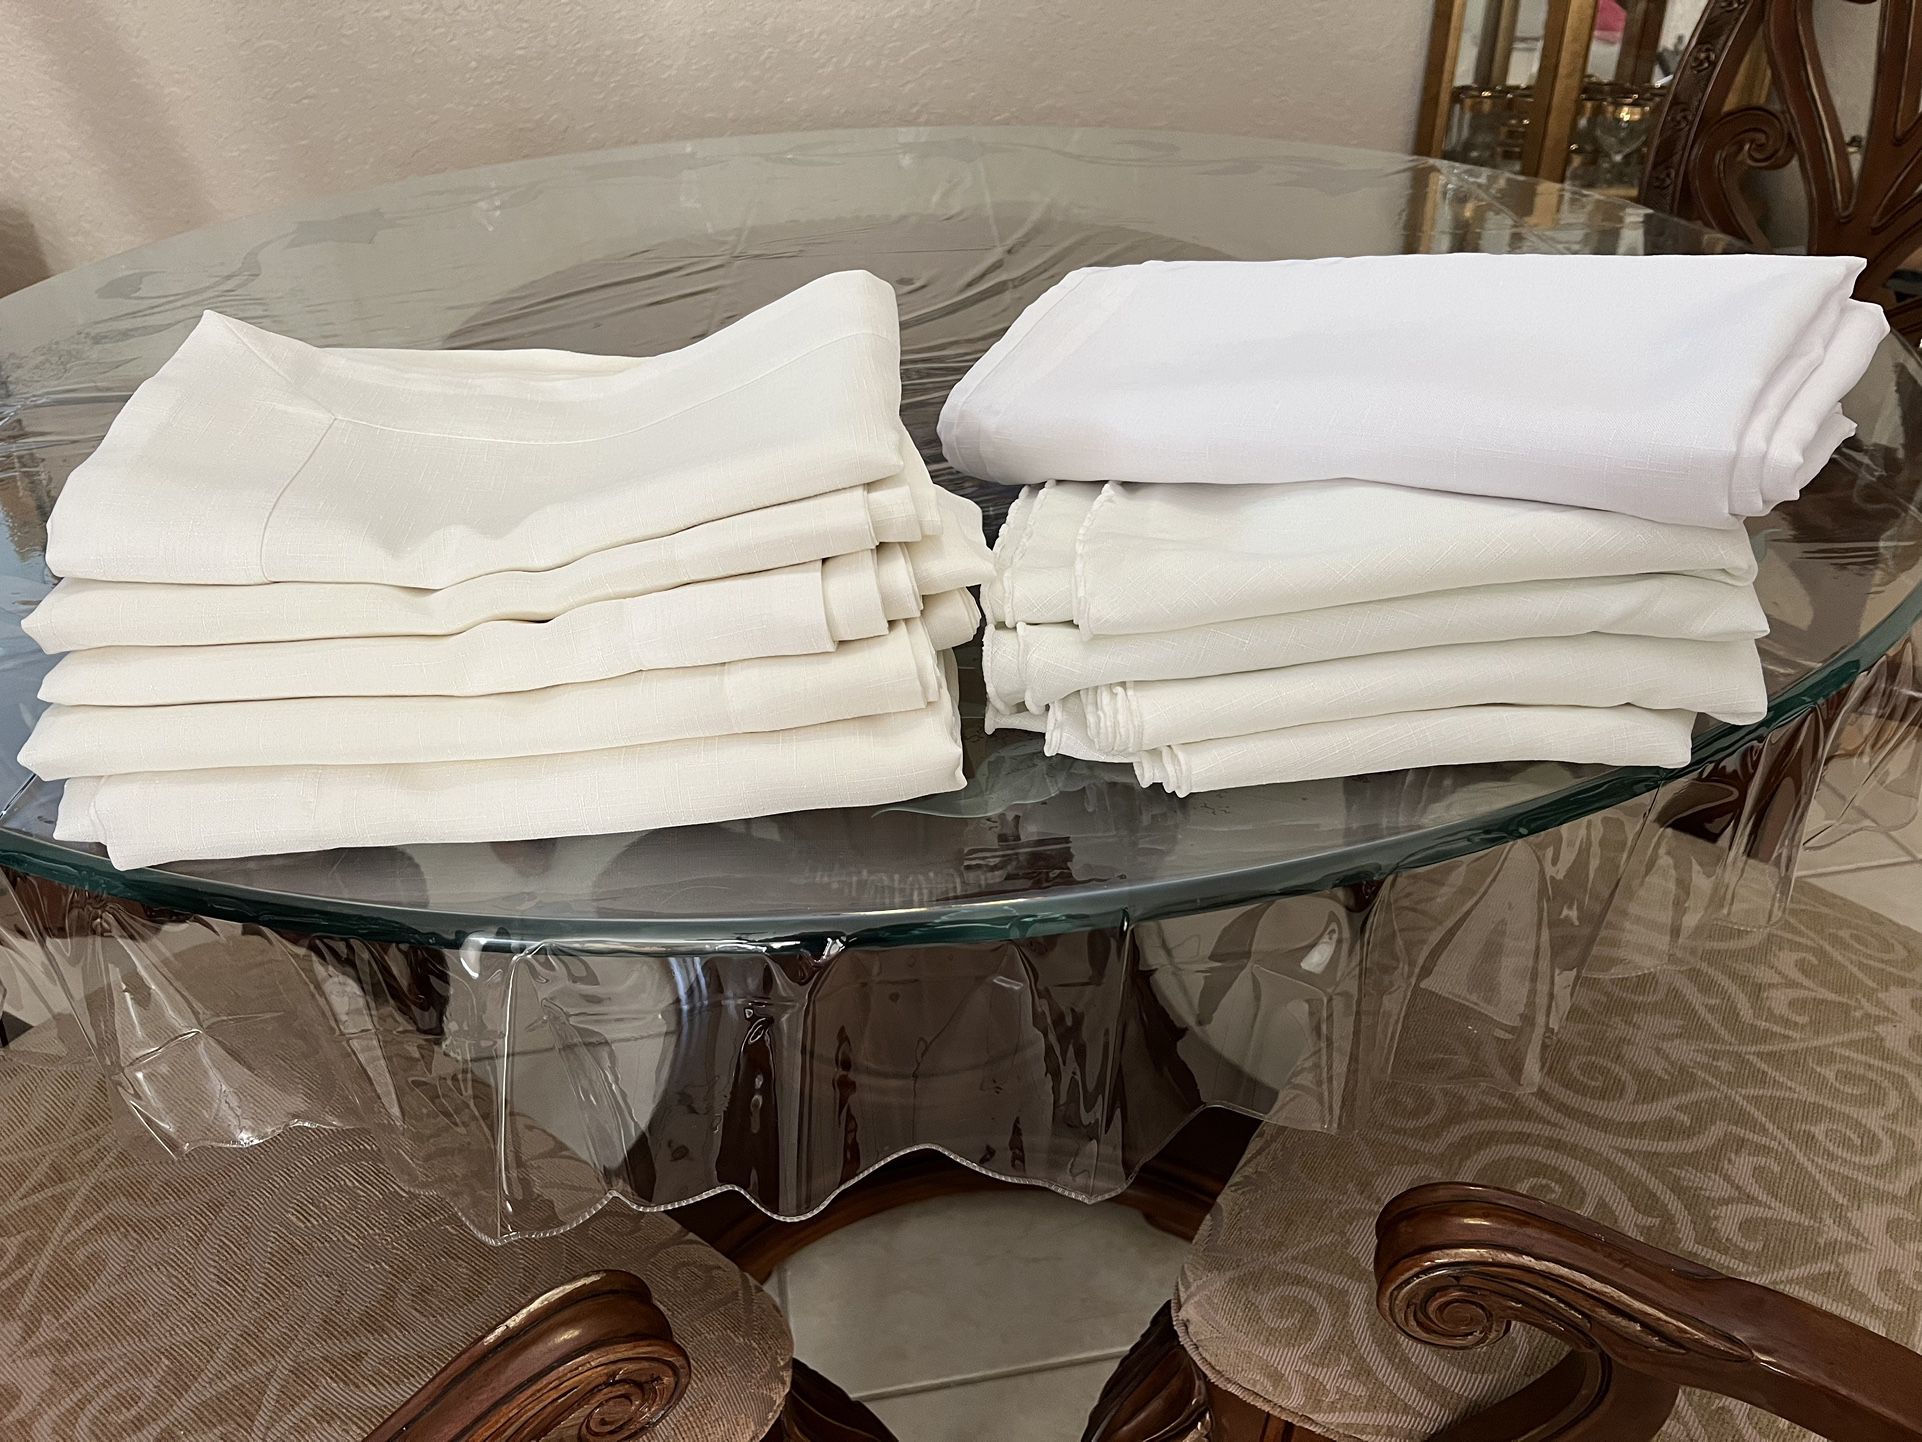 TEN table clothes , white/ivory, good washable fabric.  ($ 5.each) Used  once only. .